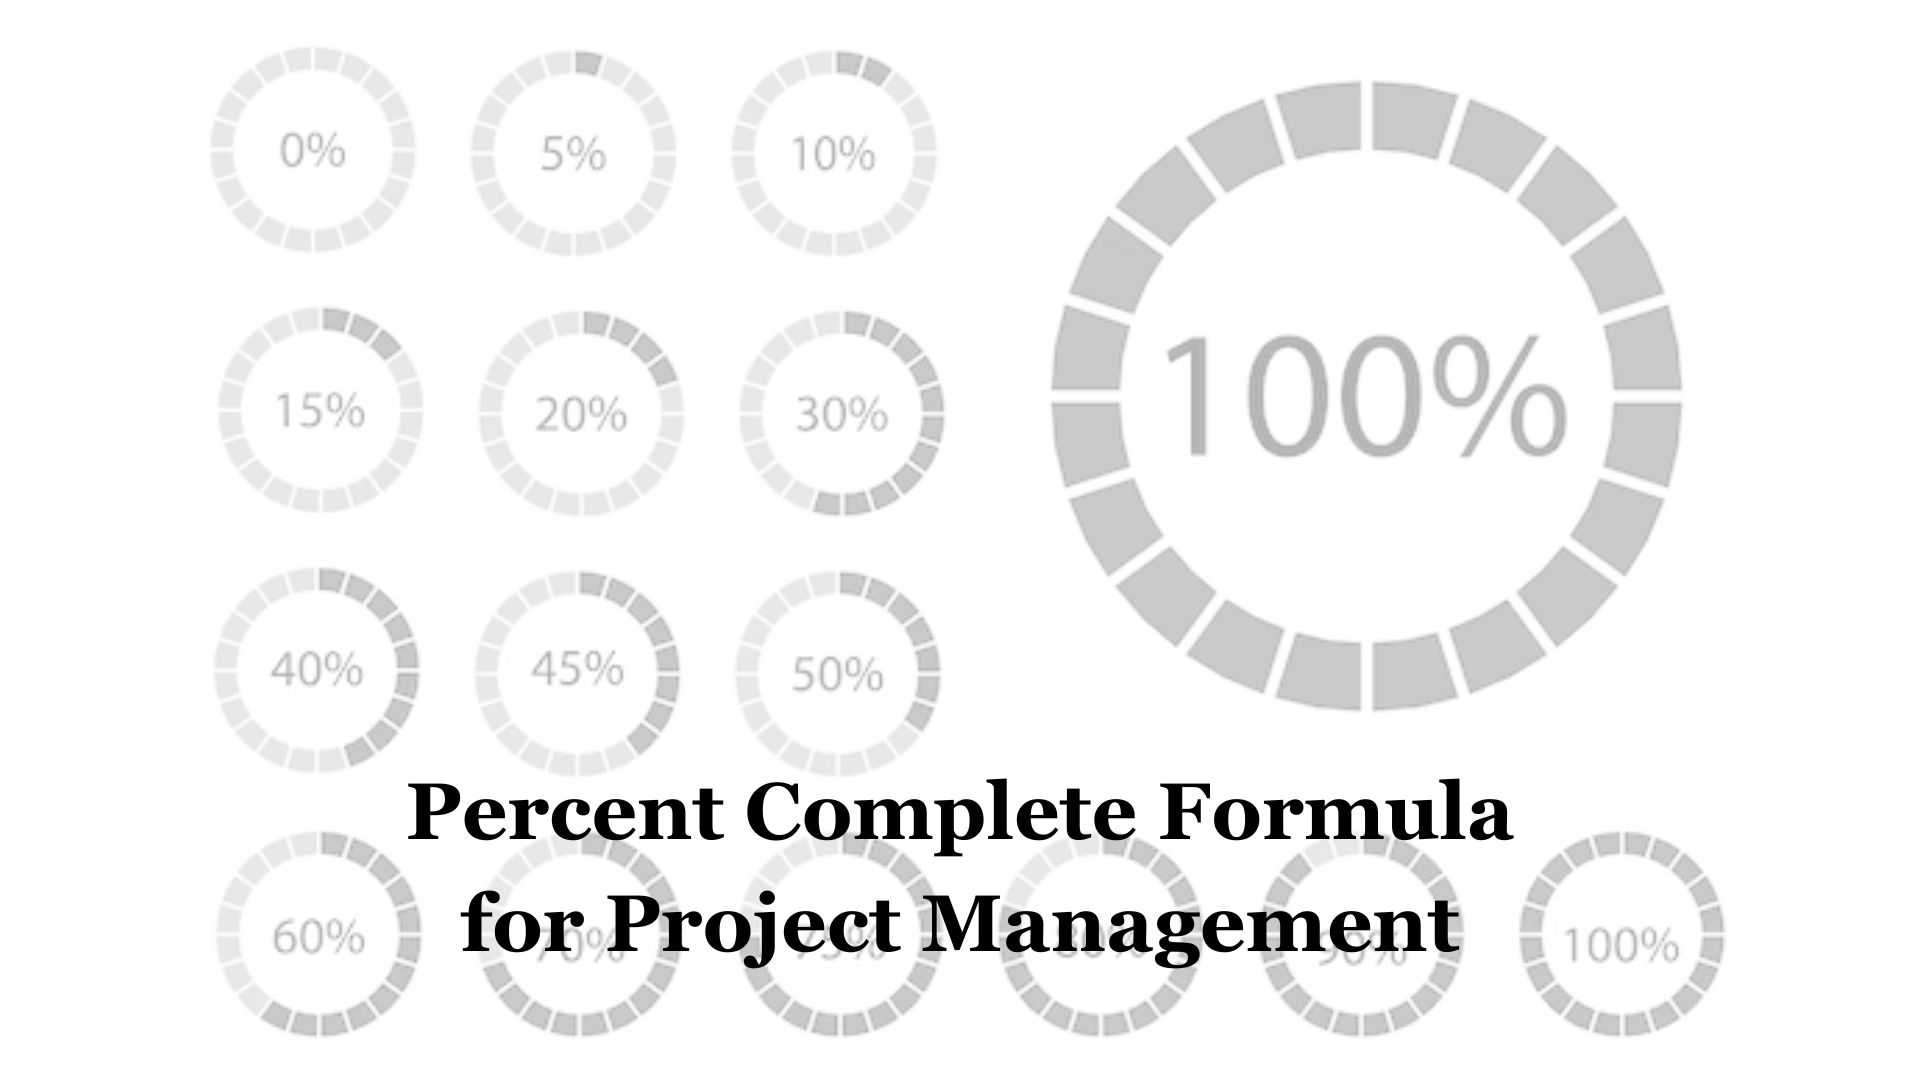 Master the Percent Complete Formula for Project Management